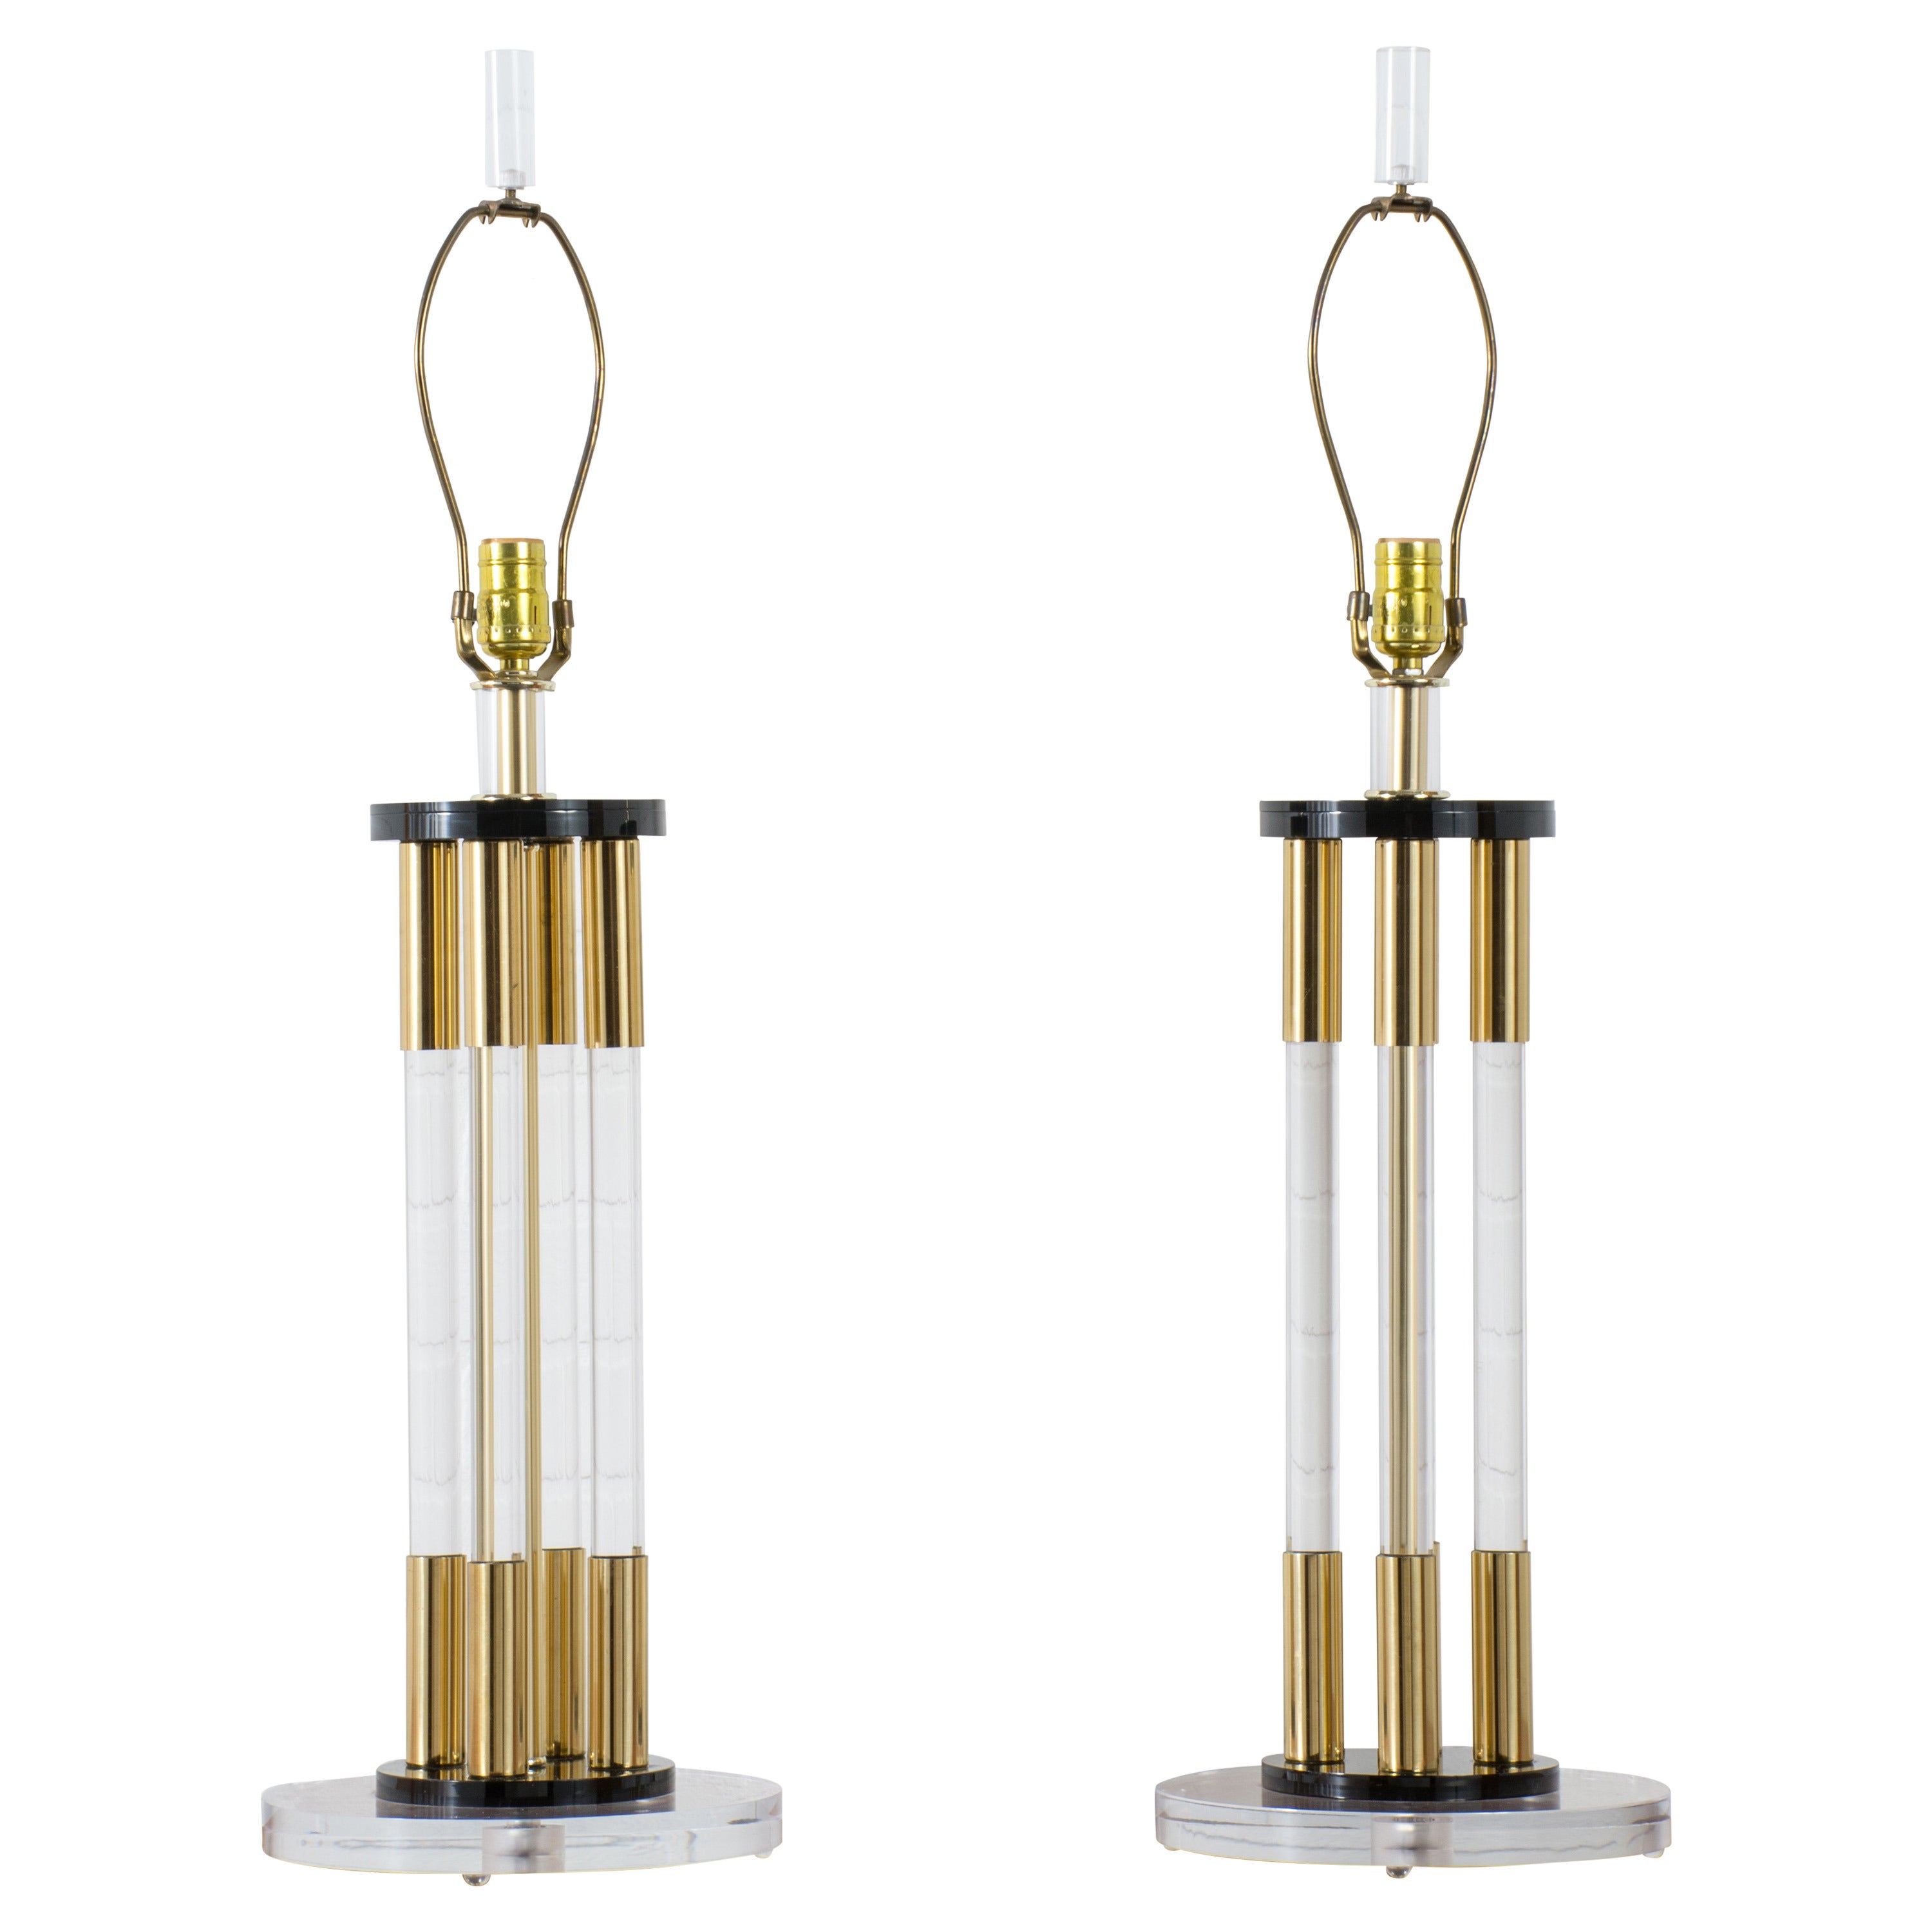 Pair of Vintage Lucite & Brass Table Lamps